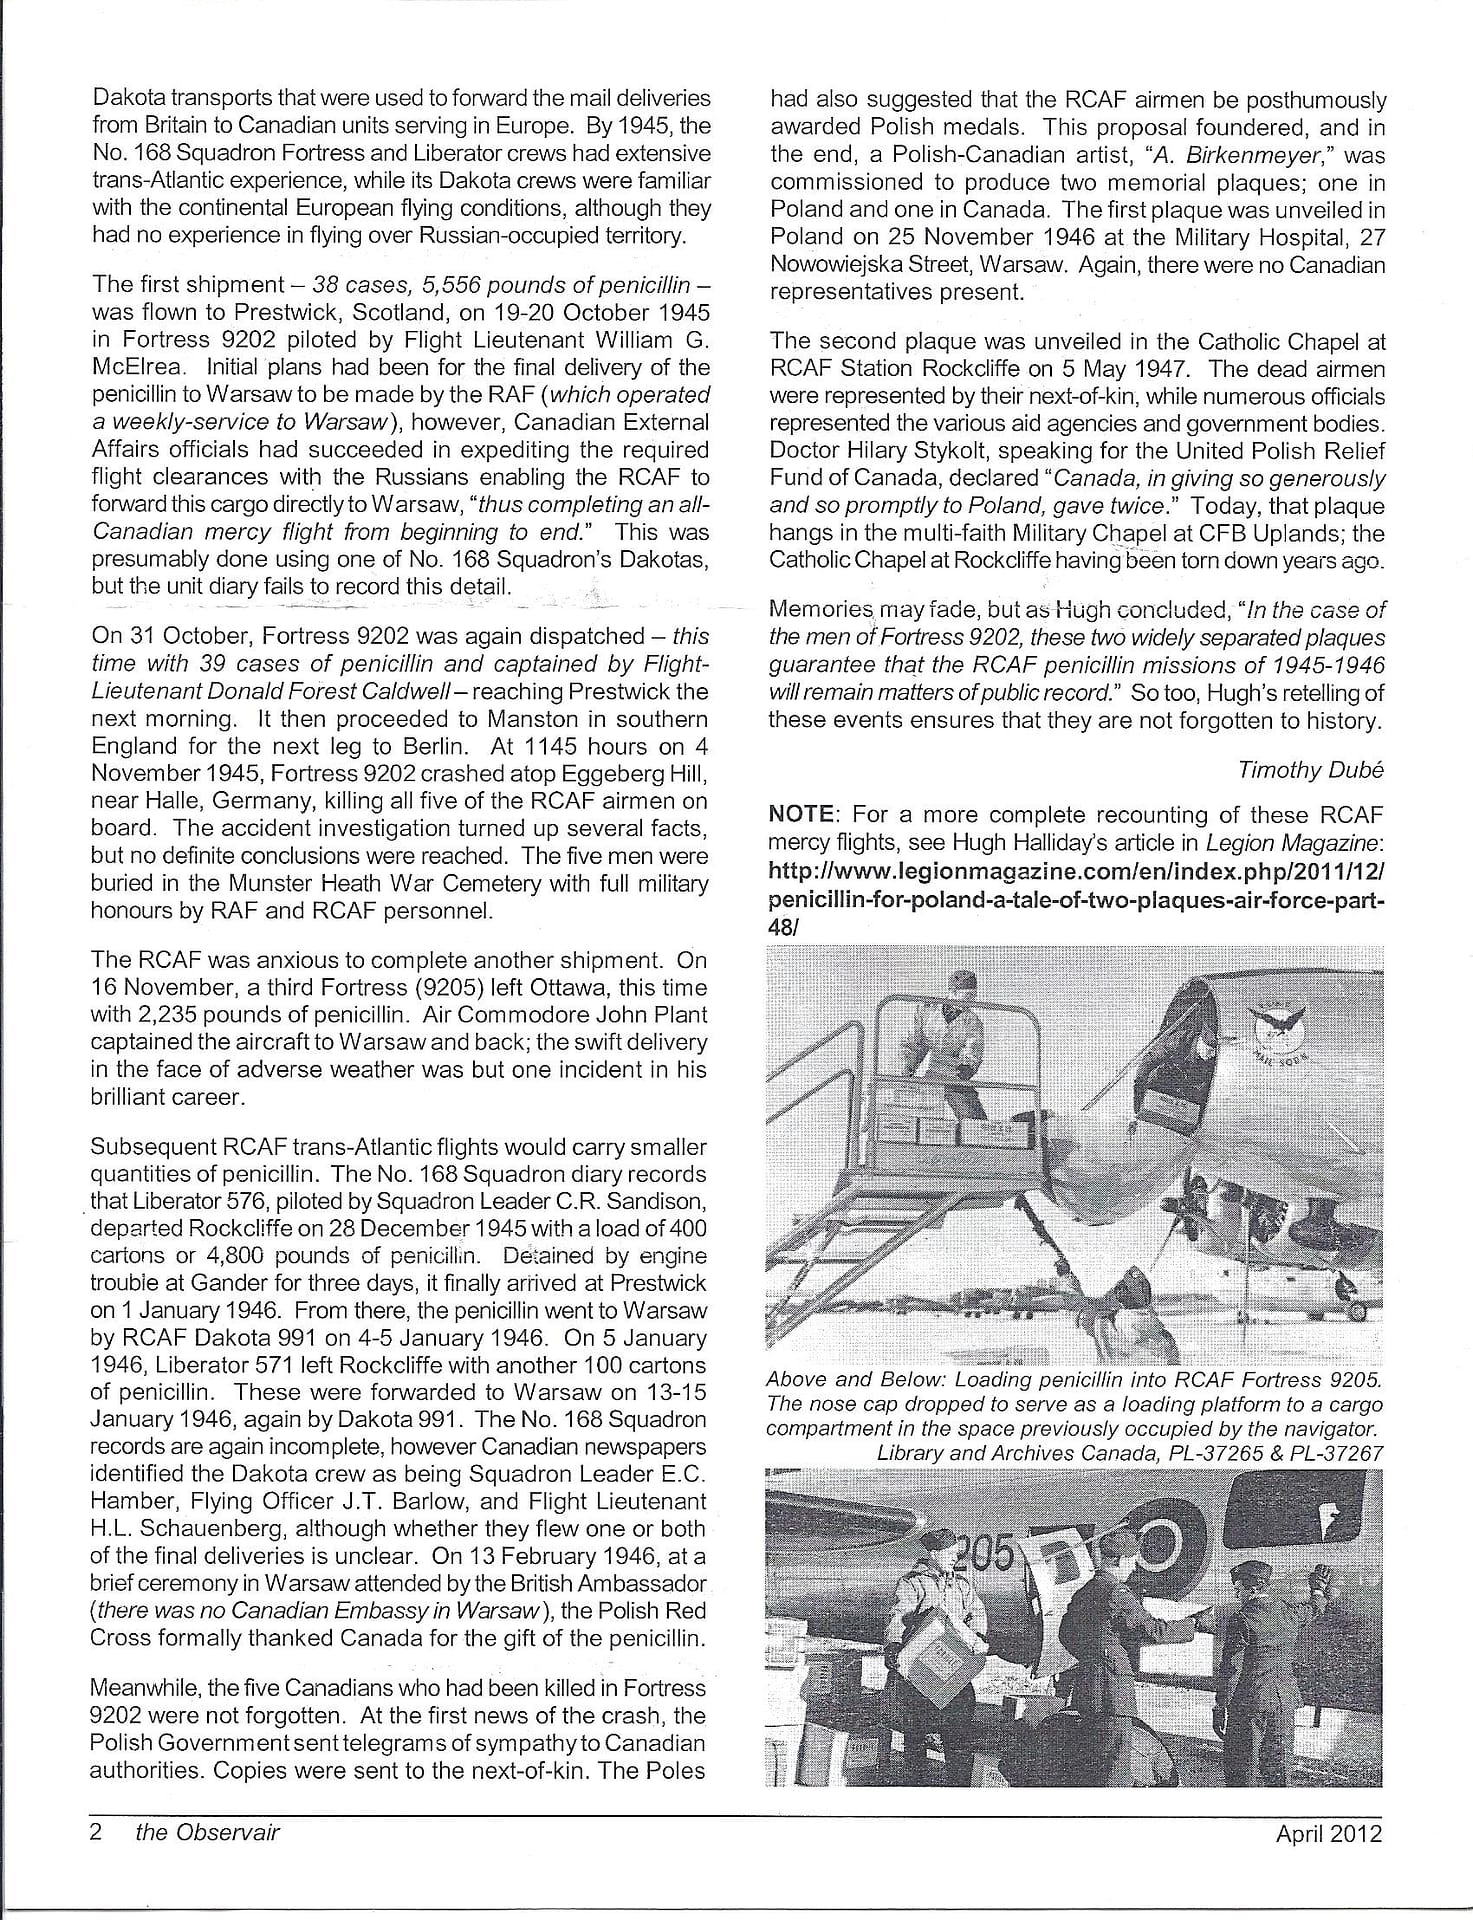 page 2 of the Observair article of Mission to Warsaw by Hugh Halliday